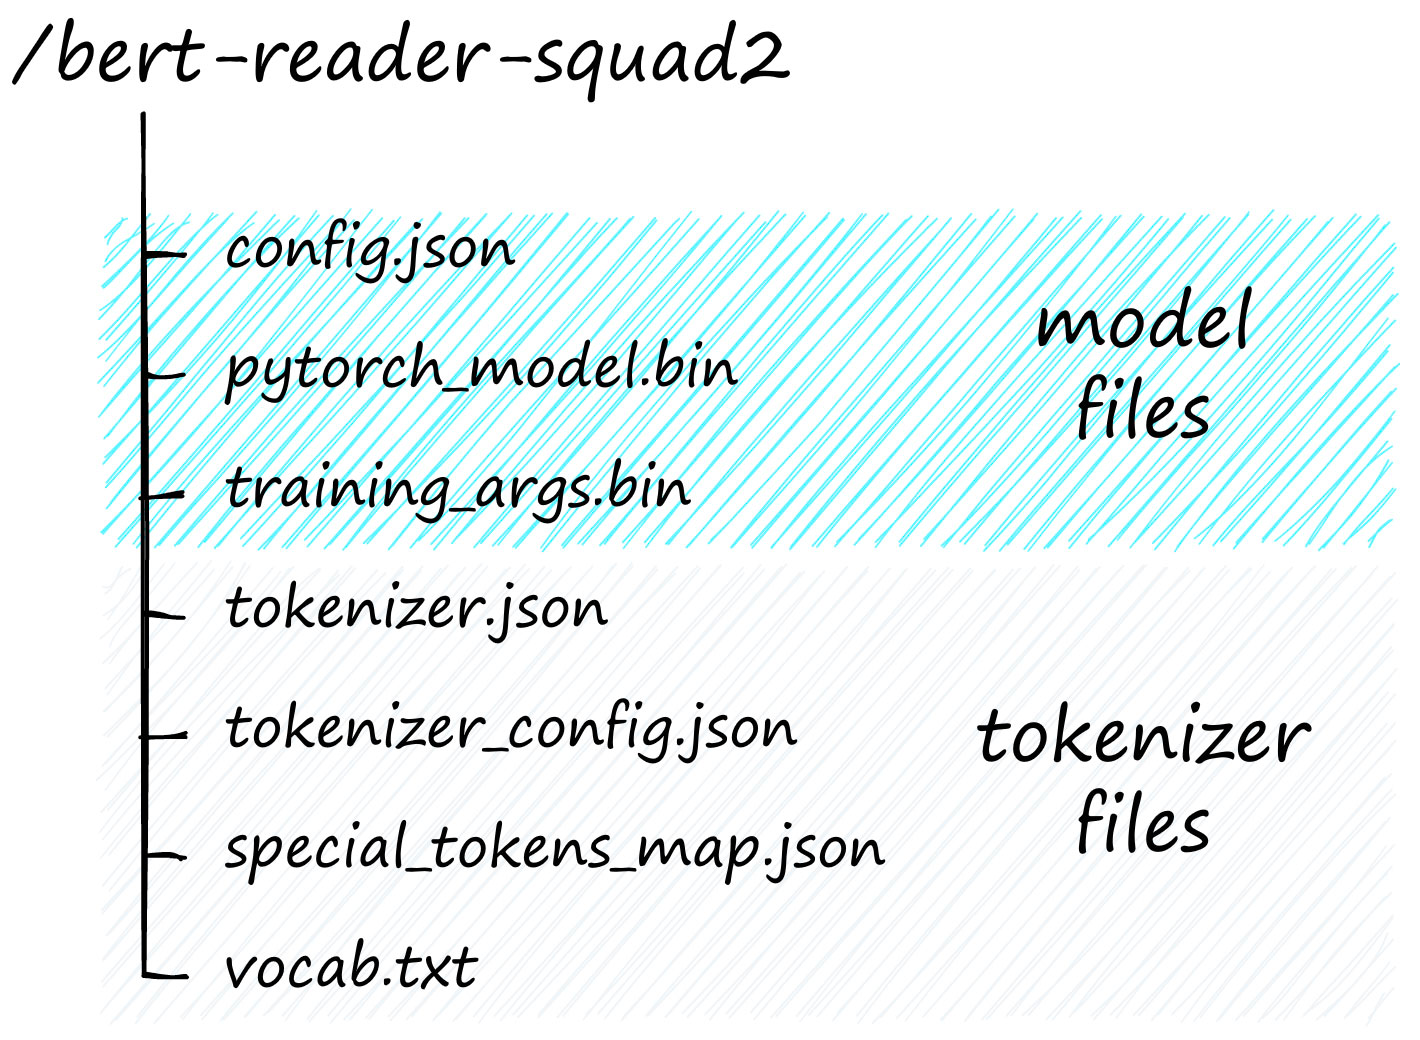 Model and tokenizer files in the /bert-reader-squad2 model directory.